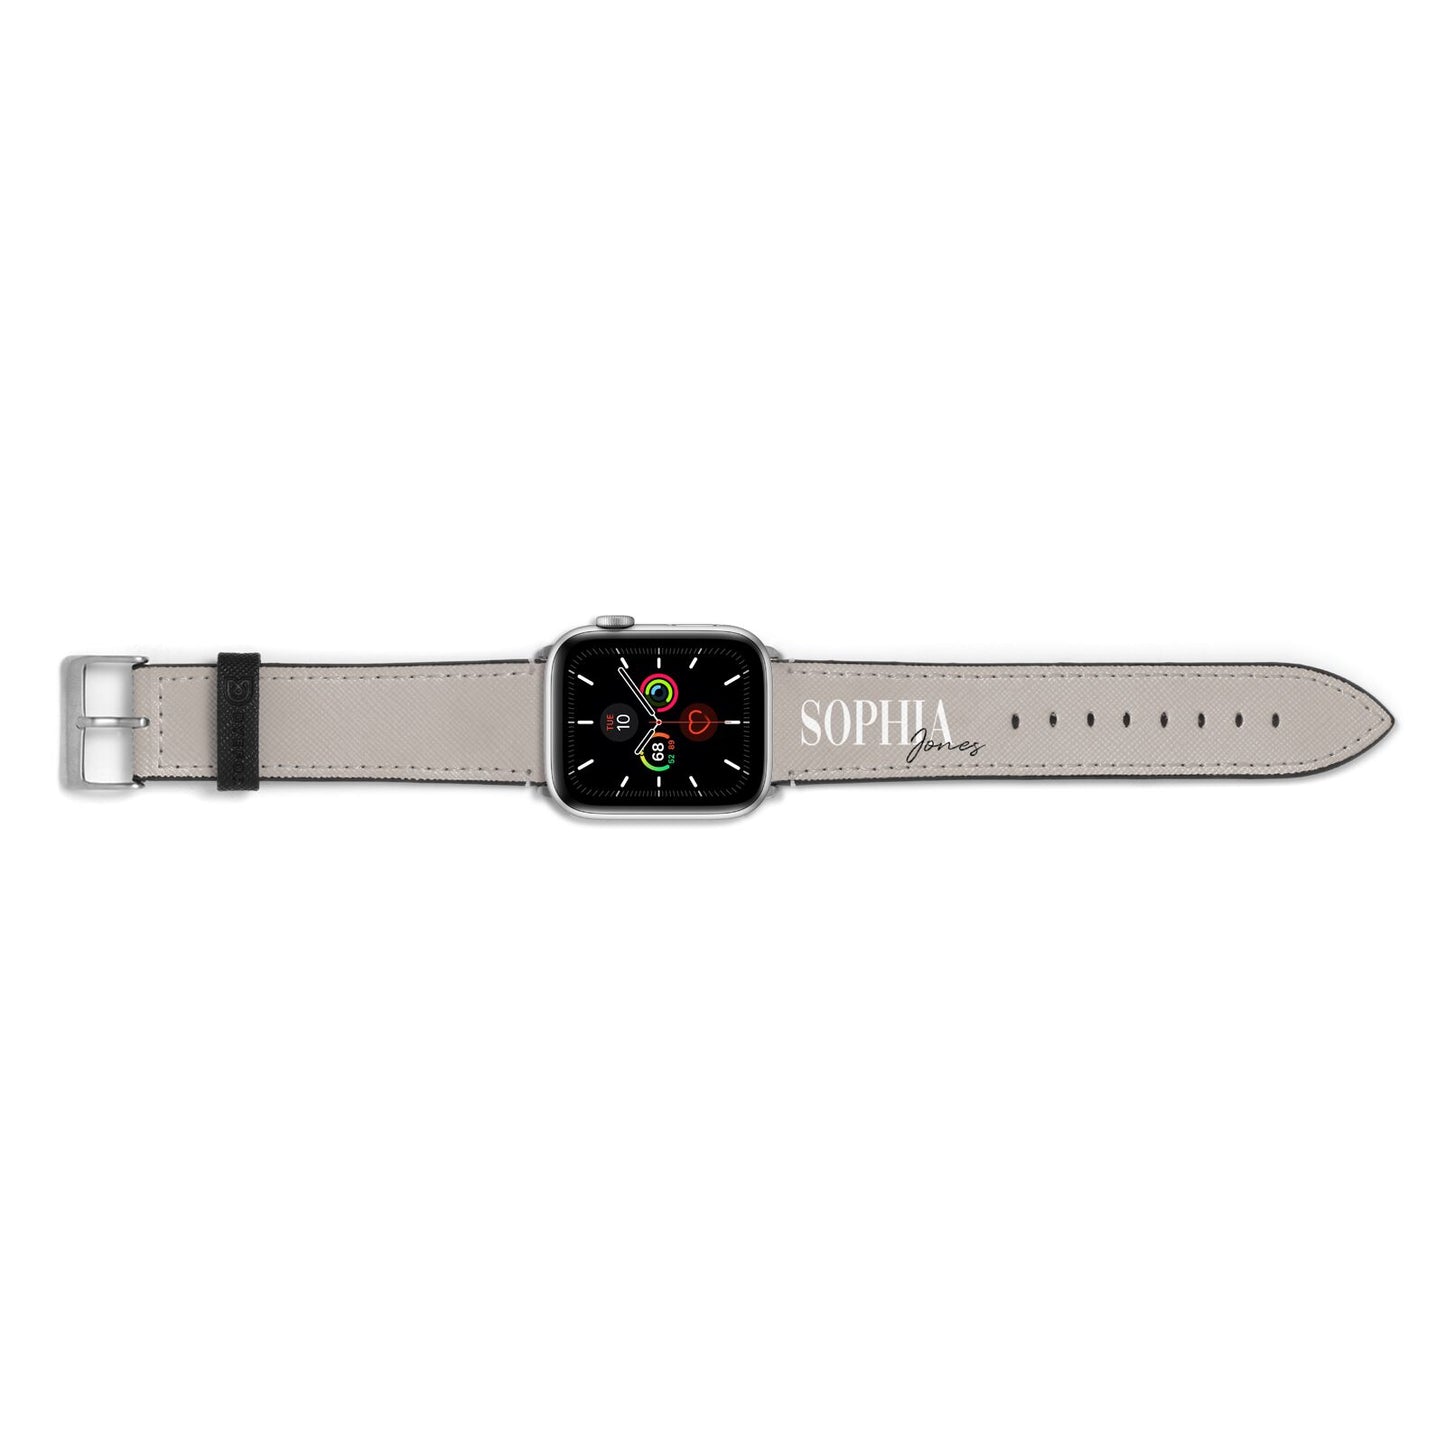 Stone Colour with Personalised Name Apple Watch Strap Landscape Image Silver Hardware